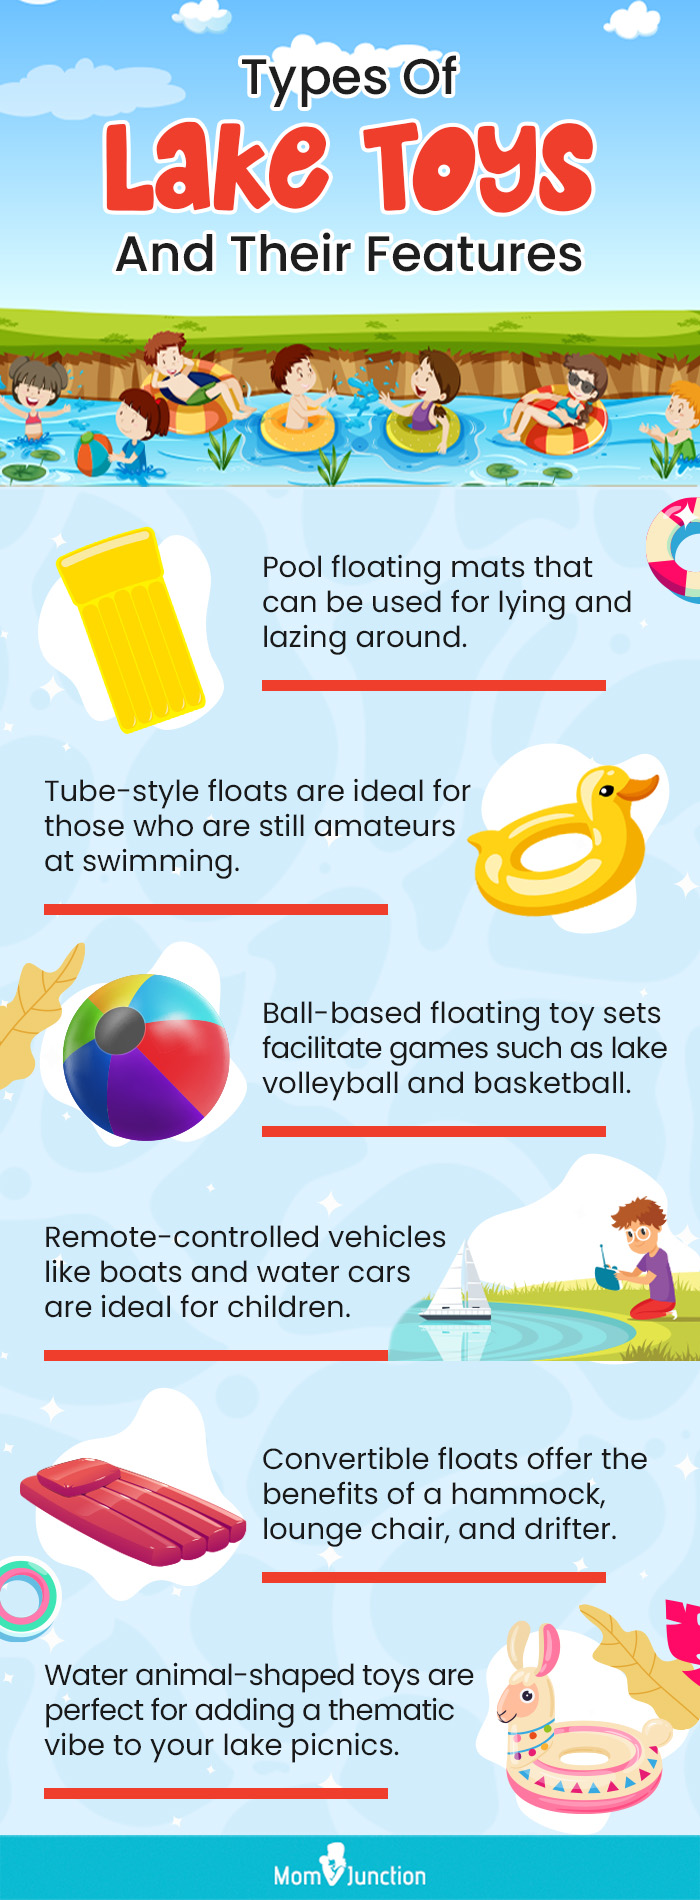 Types Of Lake Toys And Their Features (infographic)